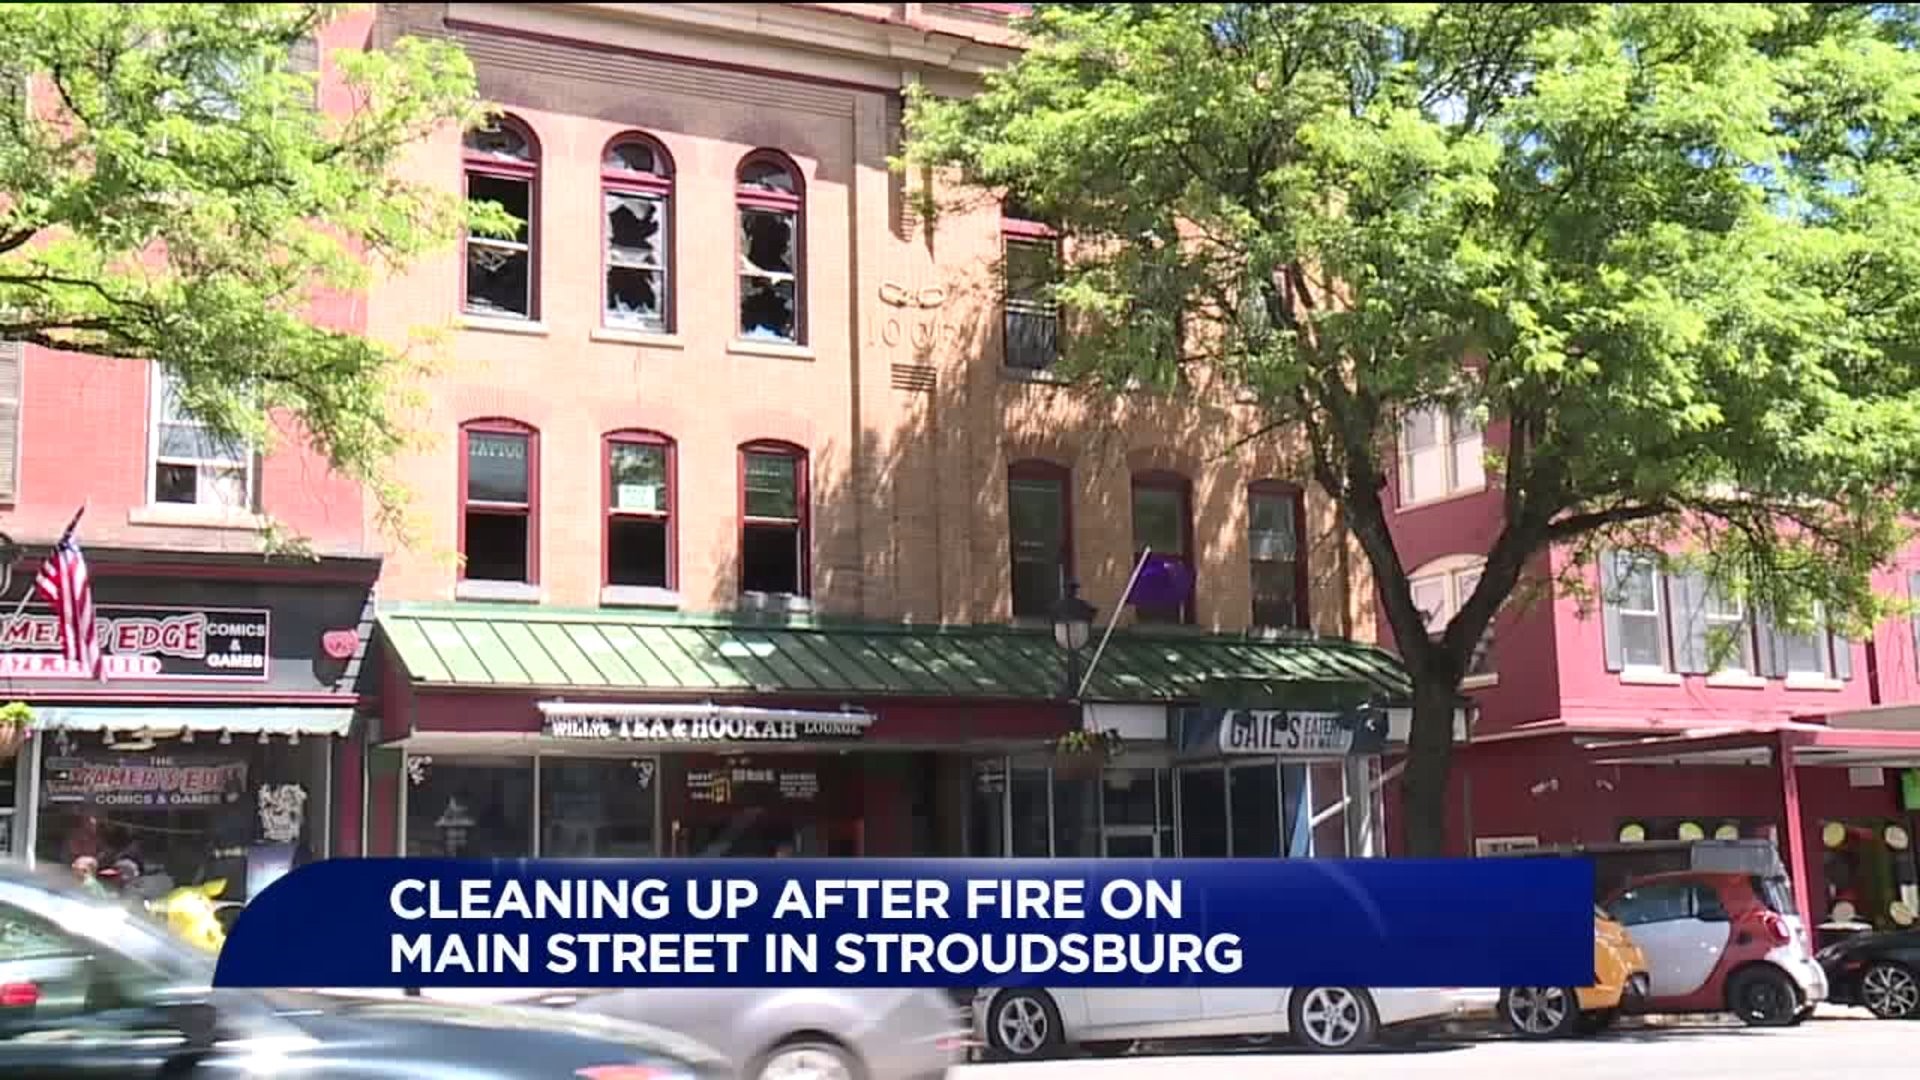 Cleaning Up After Fire on Main Street in Stroudsburg